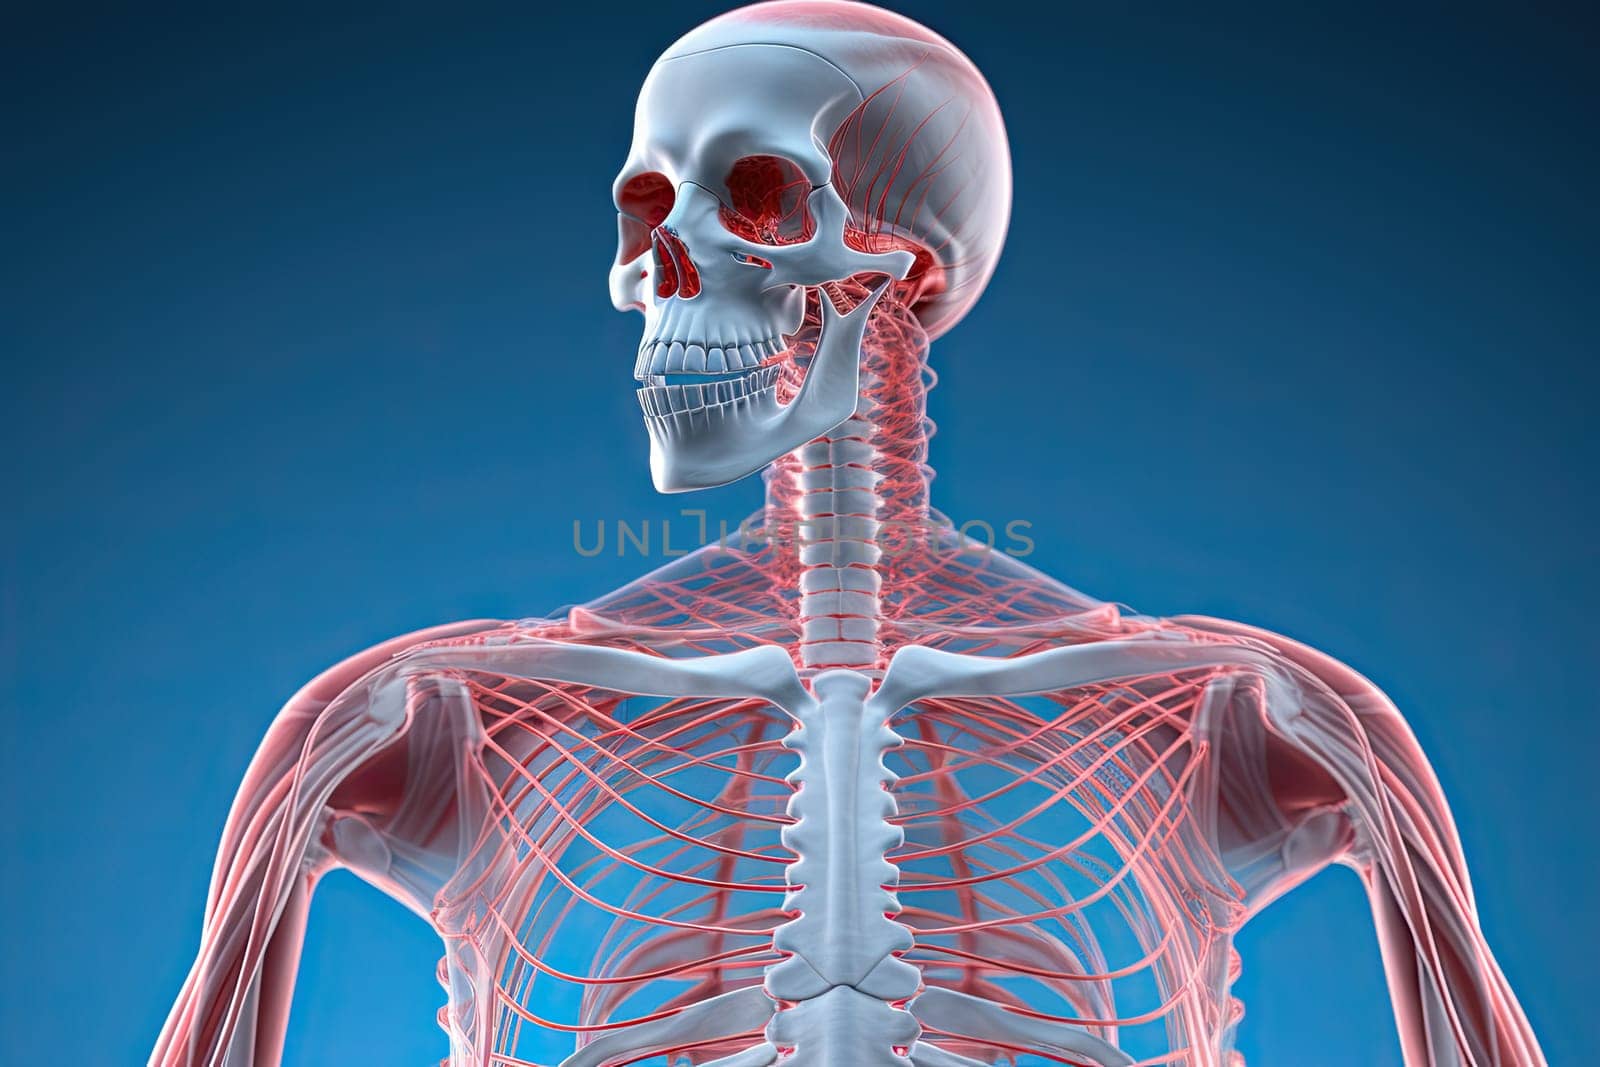 The Anatomy of the Human Skeleton: Revealing the Muscular System in Detail Created With Generative AI Technology